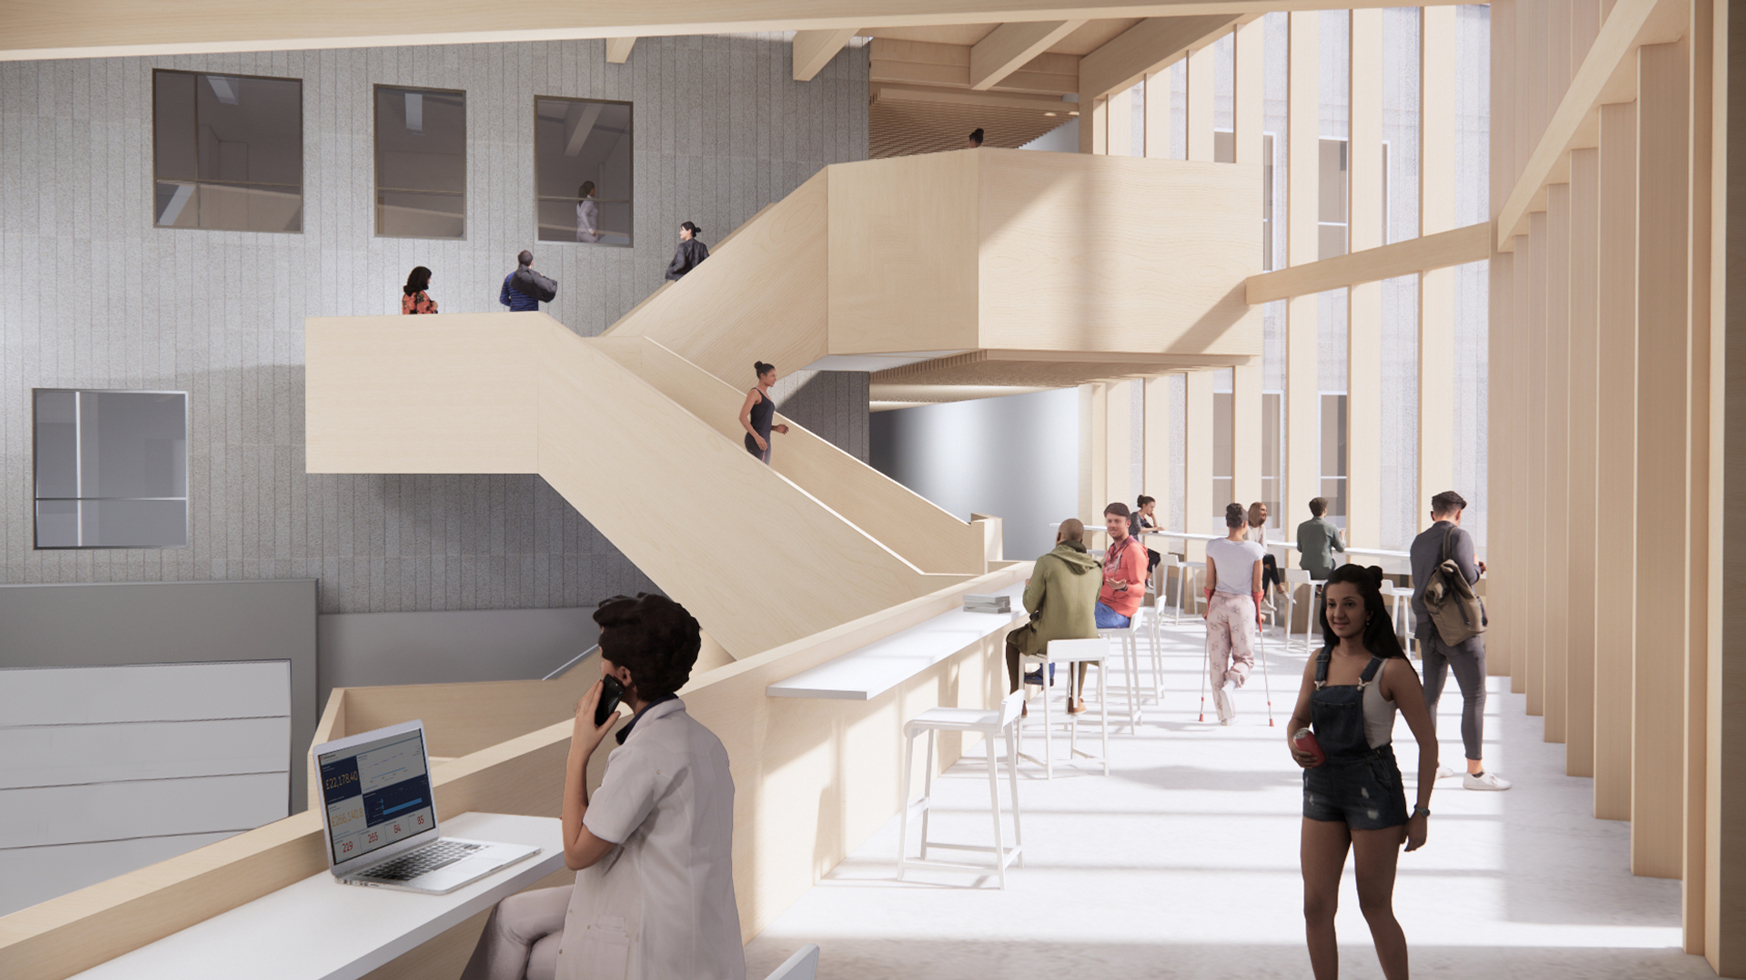 View of indoor balcony with students walking up the staircase.